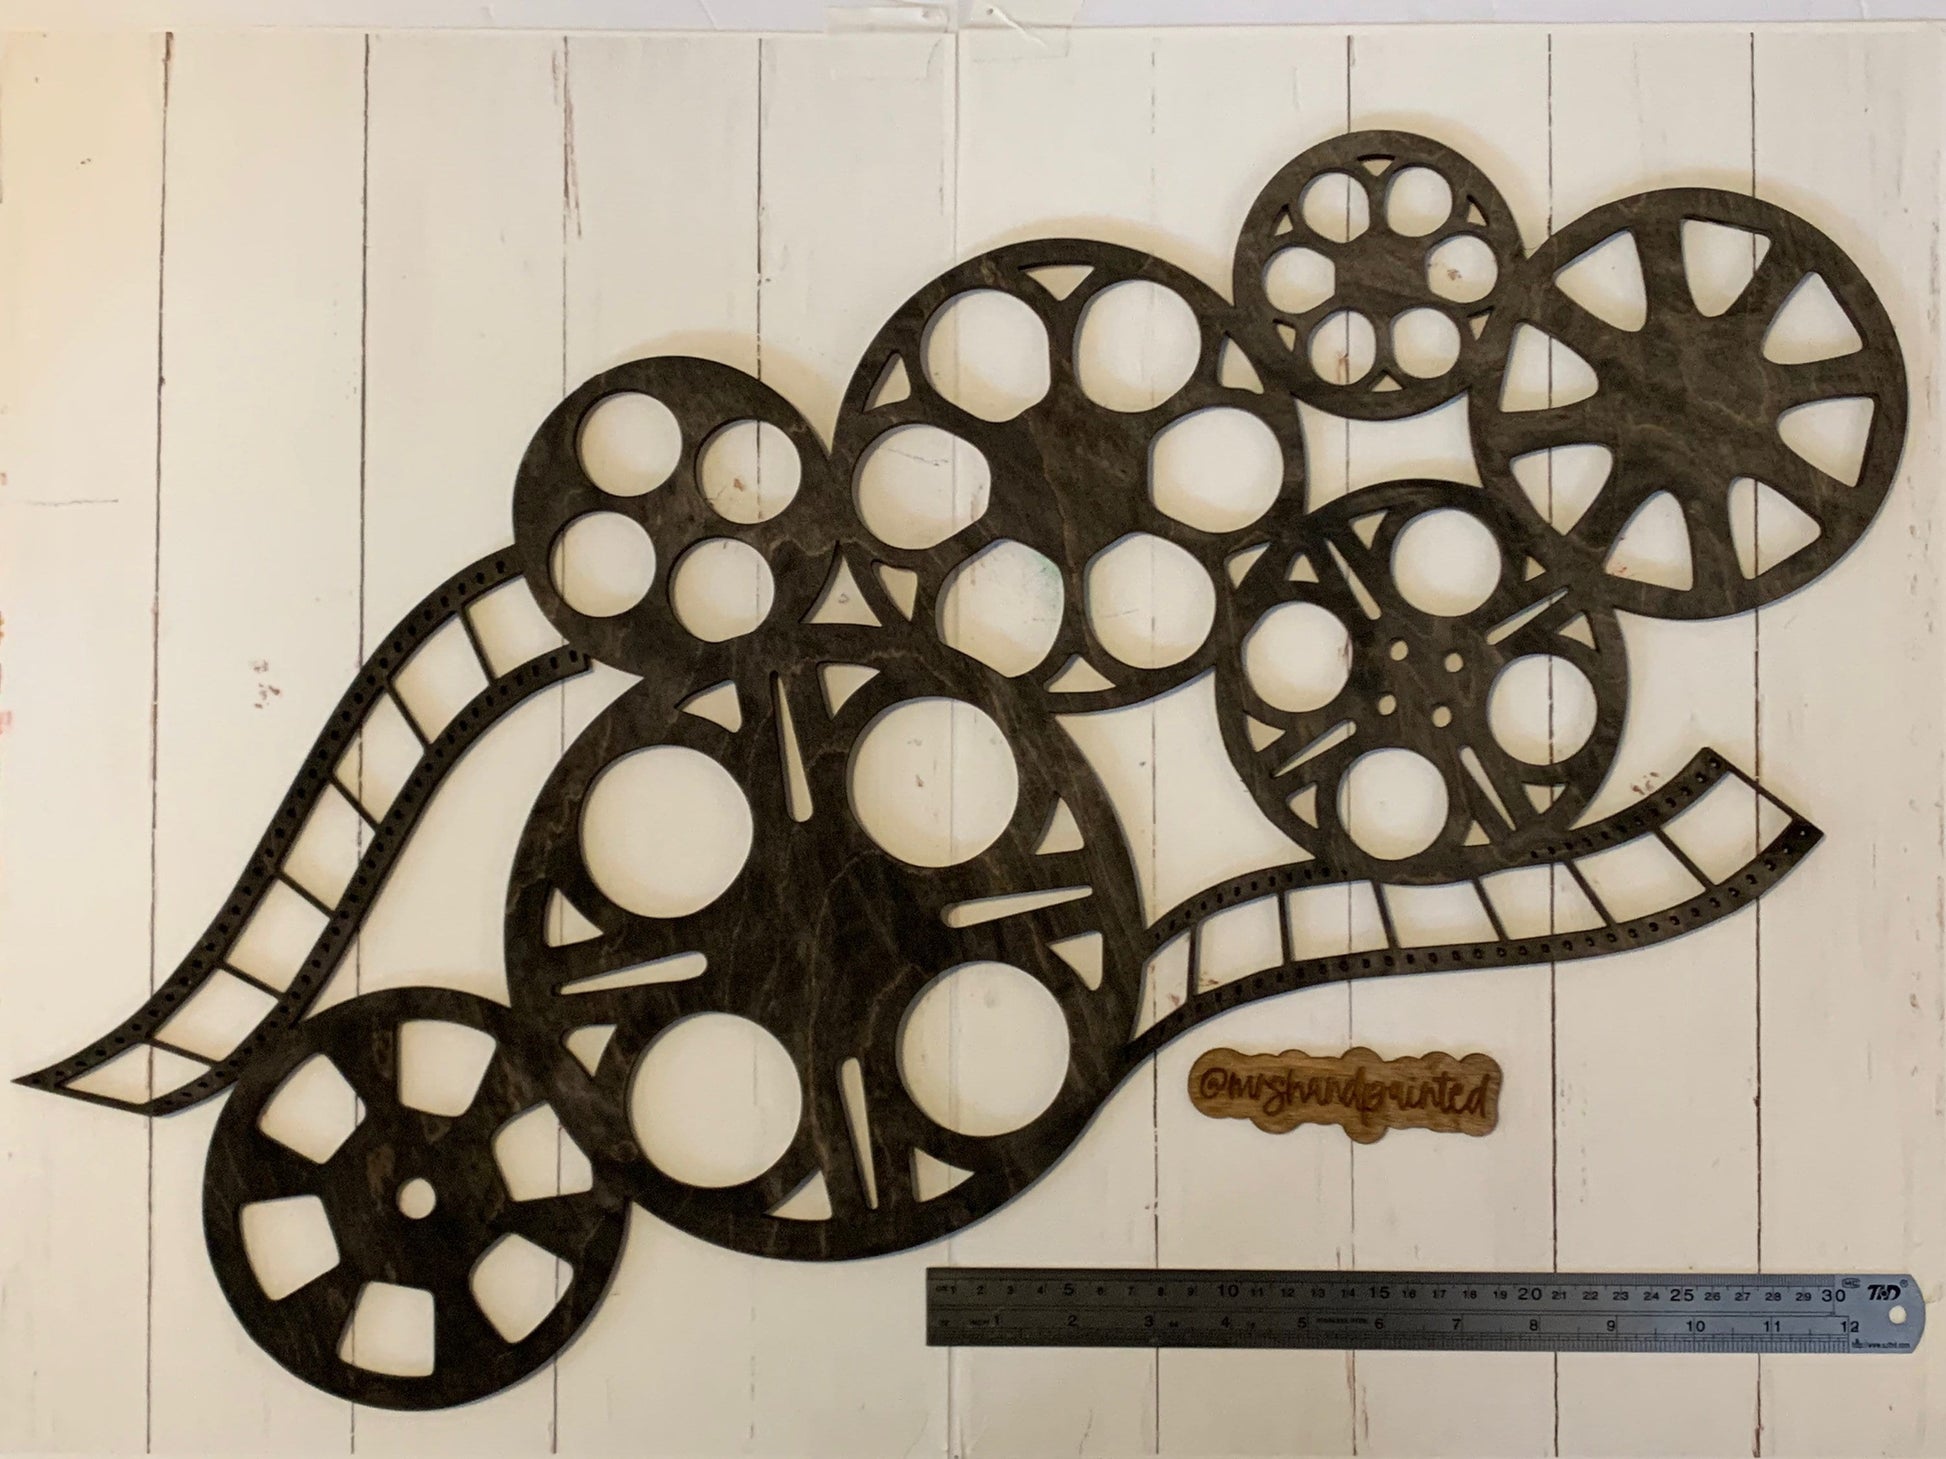 Movie Reels and Film Collage Laser Cut Wood Wall Hanging - Home Theater Decor